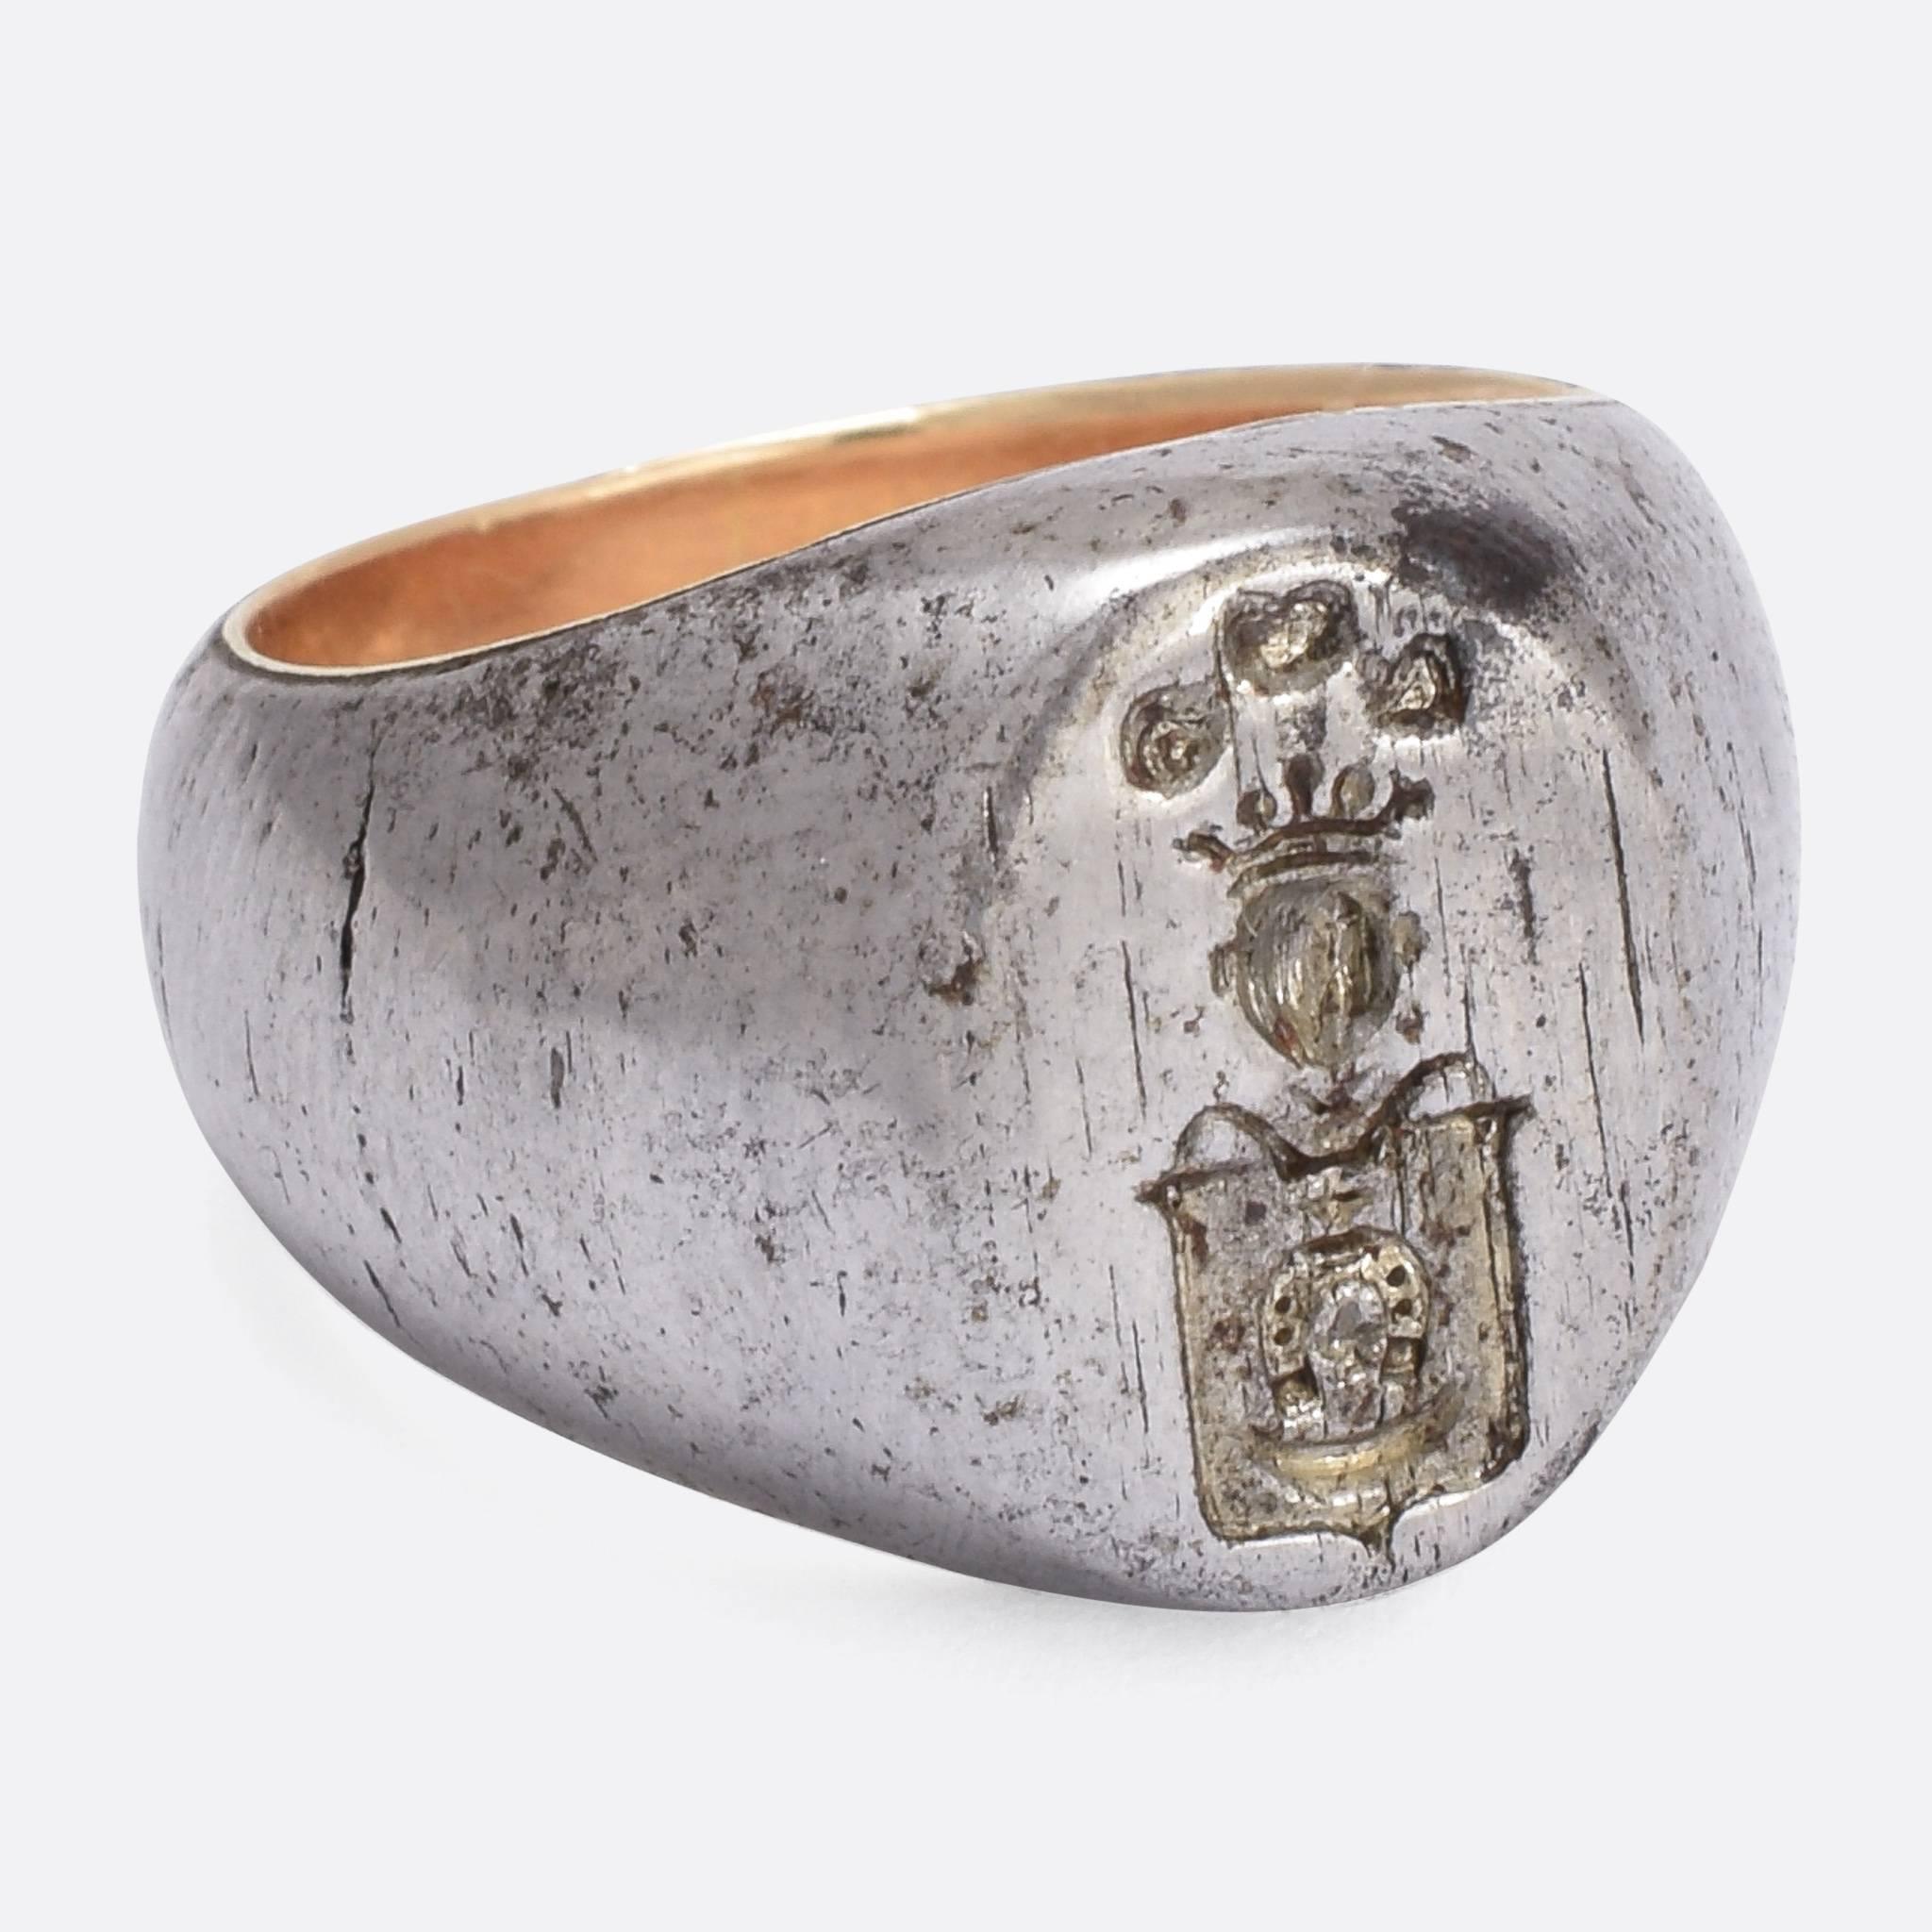 This remarkable antique signet ring is, quite unusually, made from steel. It's a good size and weight, with a heraldic coat of arms on the face. The intaglio carving depicts shield with horseshoe  crest, under a crowned knight's helm. It's a great